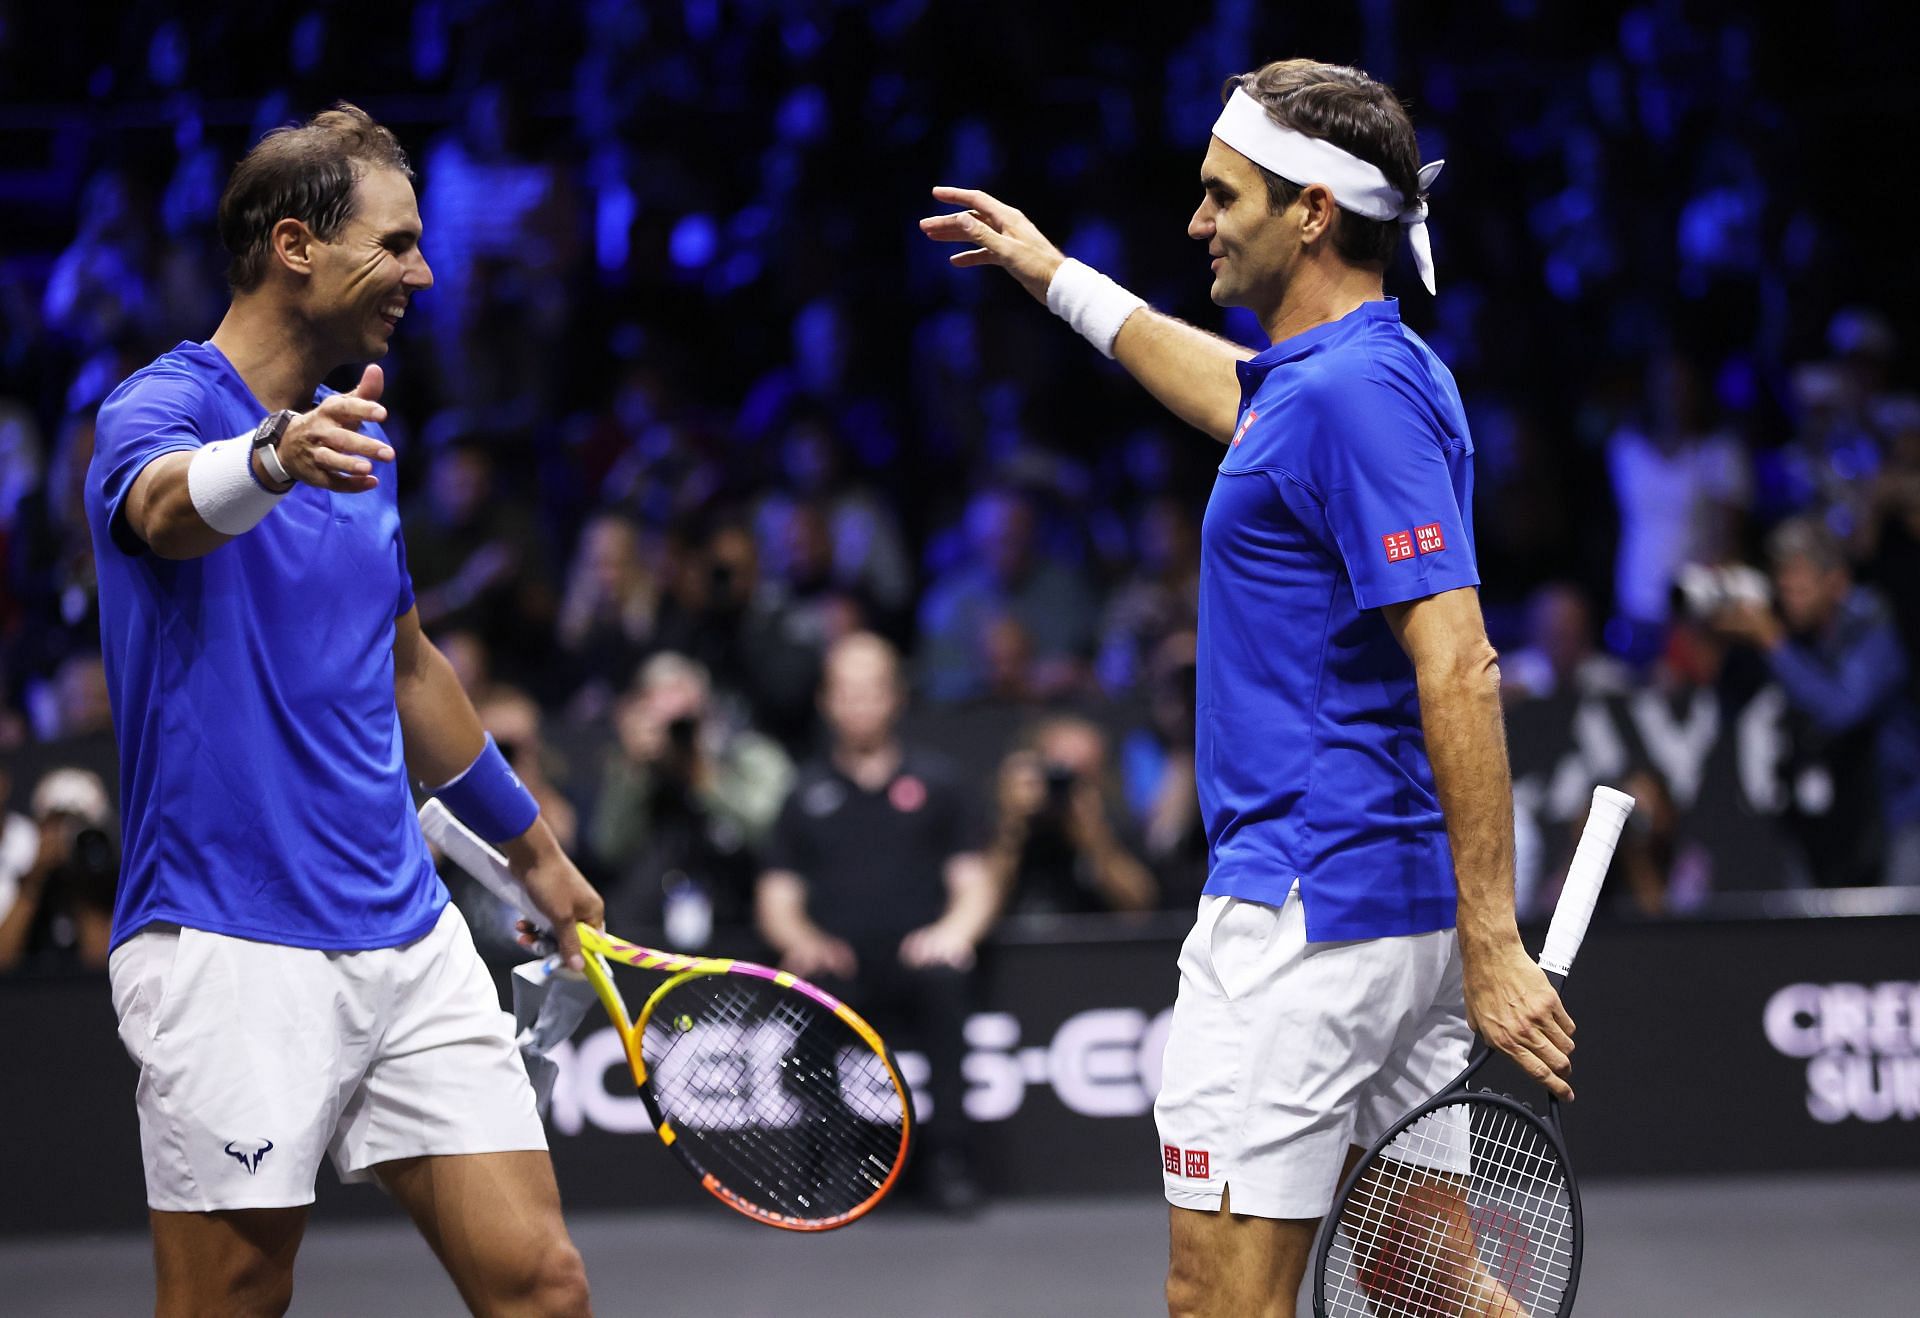 Roger Federer and Rafael Nadal of Team Europe walk to embrace each other at the Laver Cup 2022